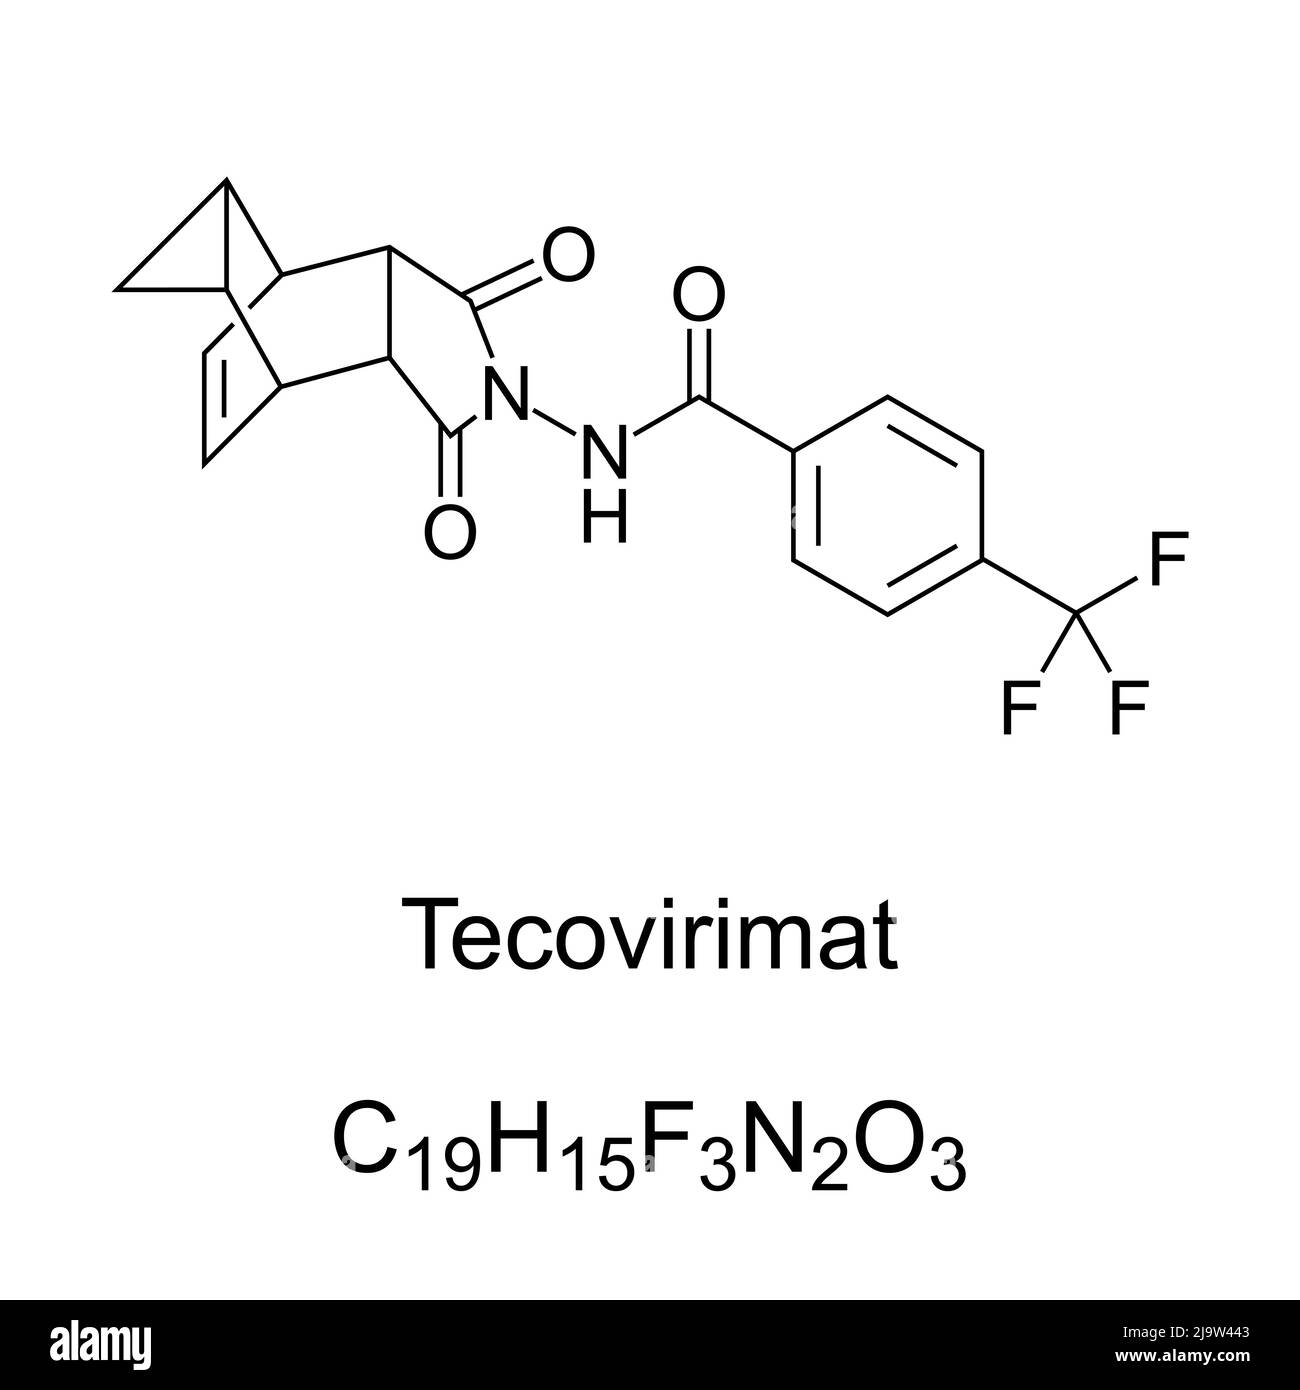 Tecovirimat, chemical formula and skeletal structure. Antiviral medication with activity against orthopoxviruses such as smallpox and monkeypox. Stock Photo